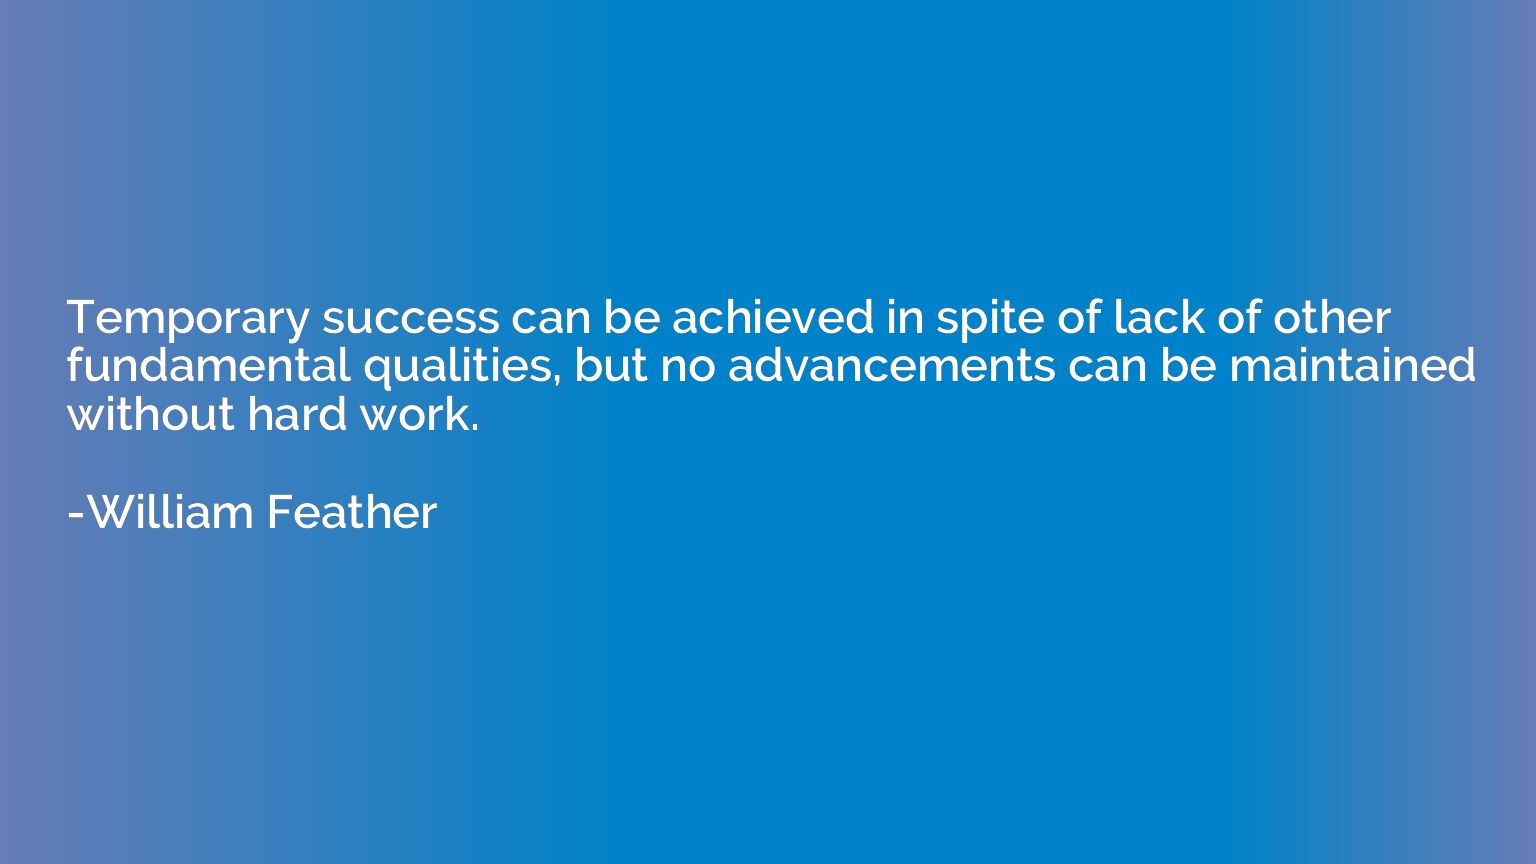 Temporary success can be achieved in spite of lack of other 